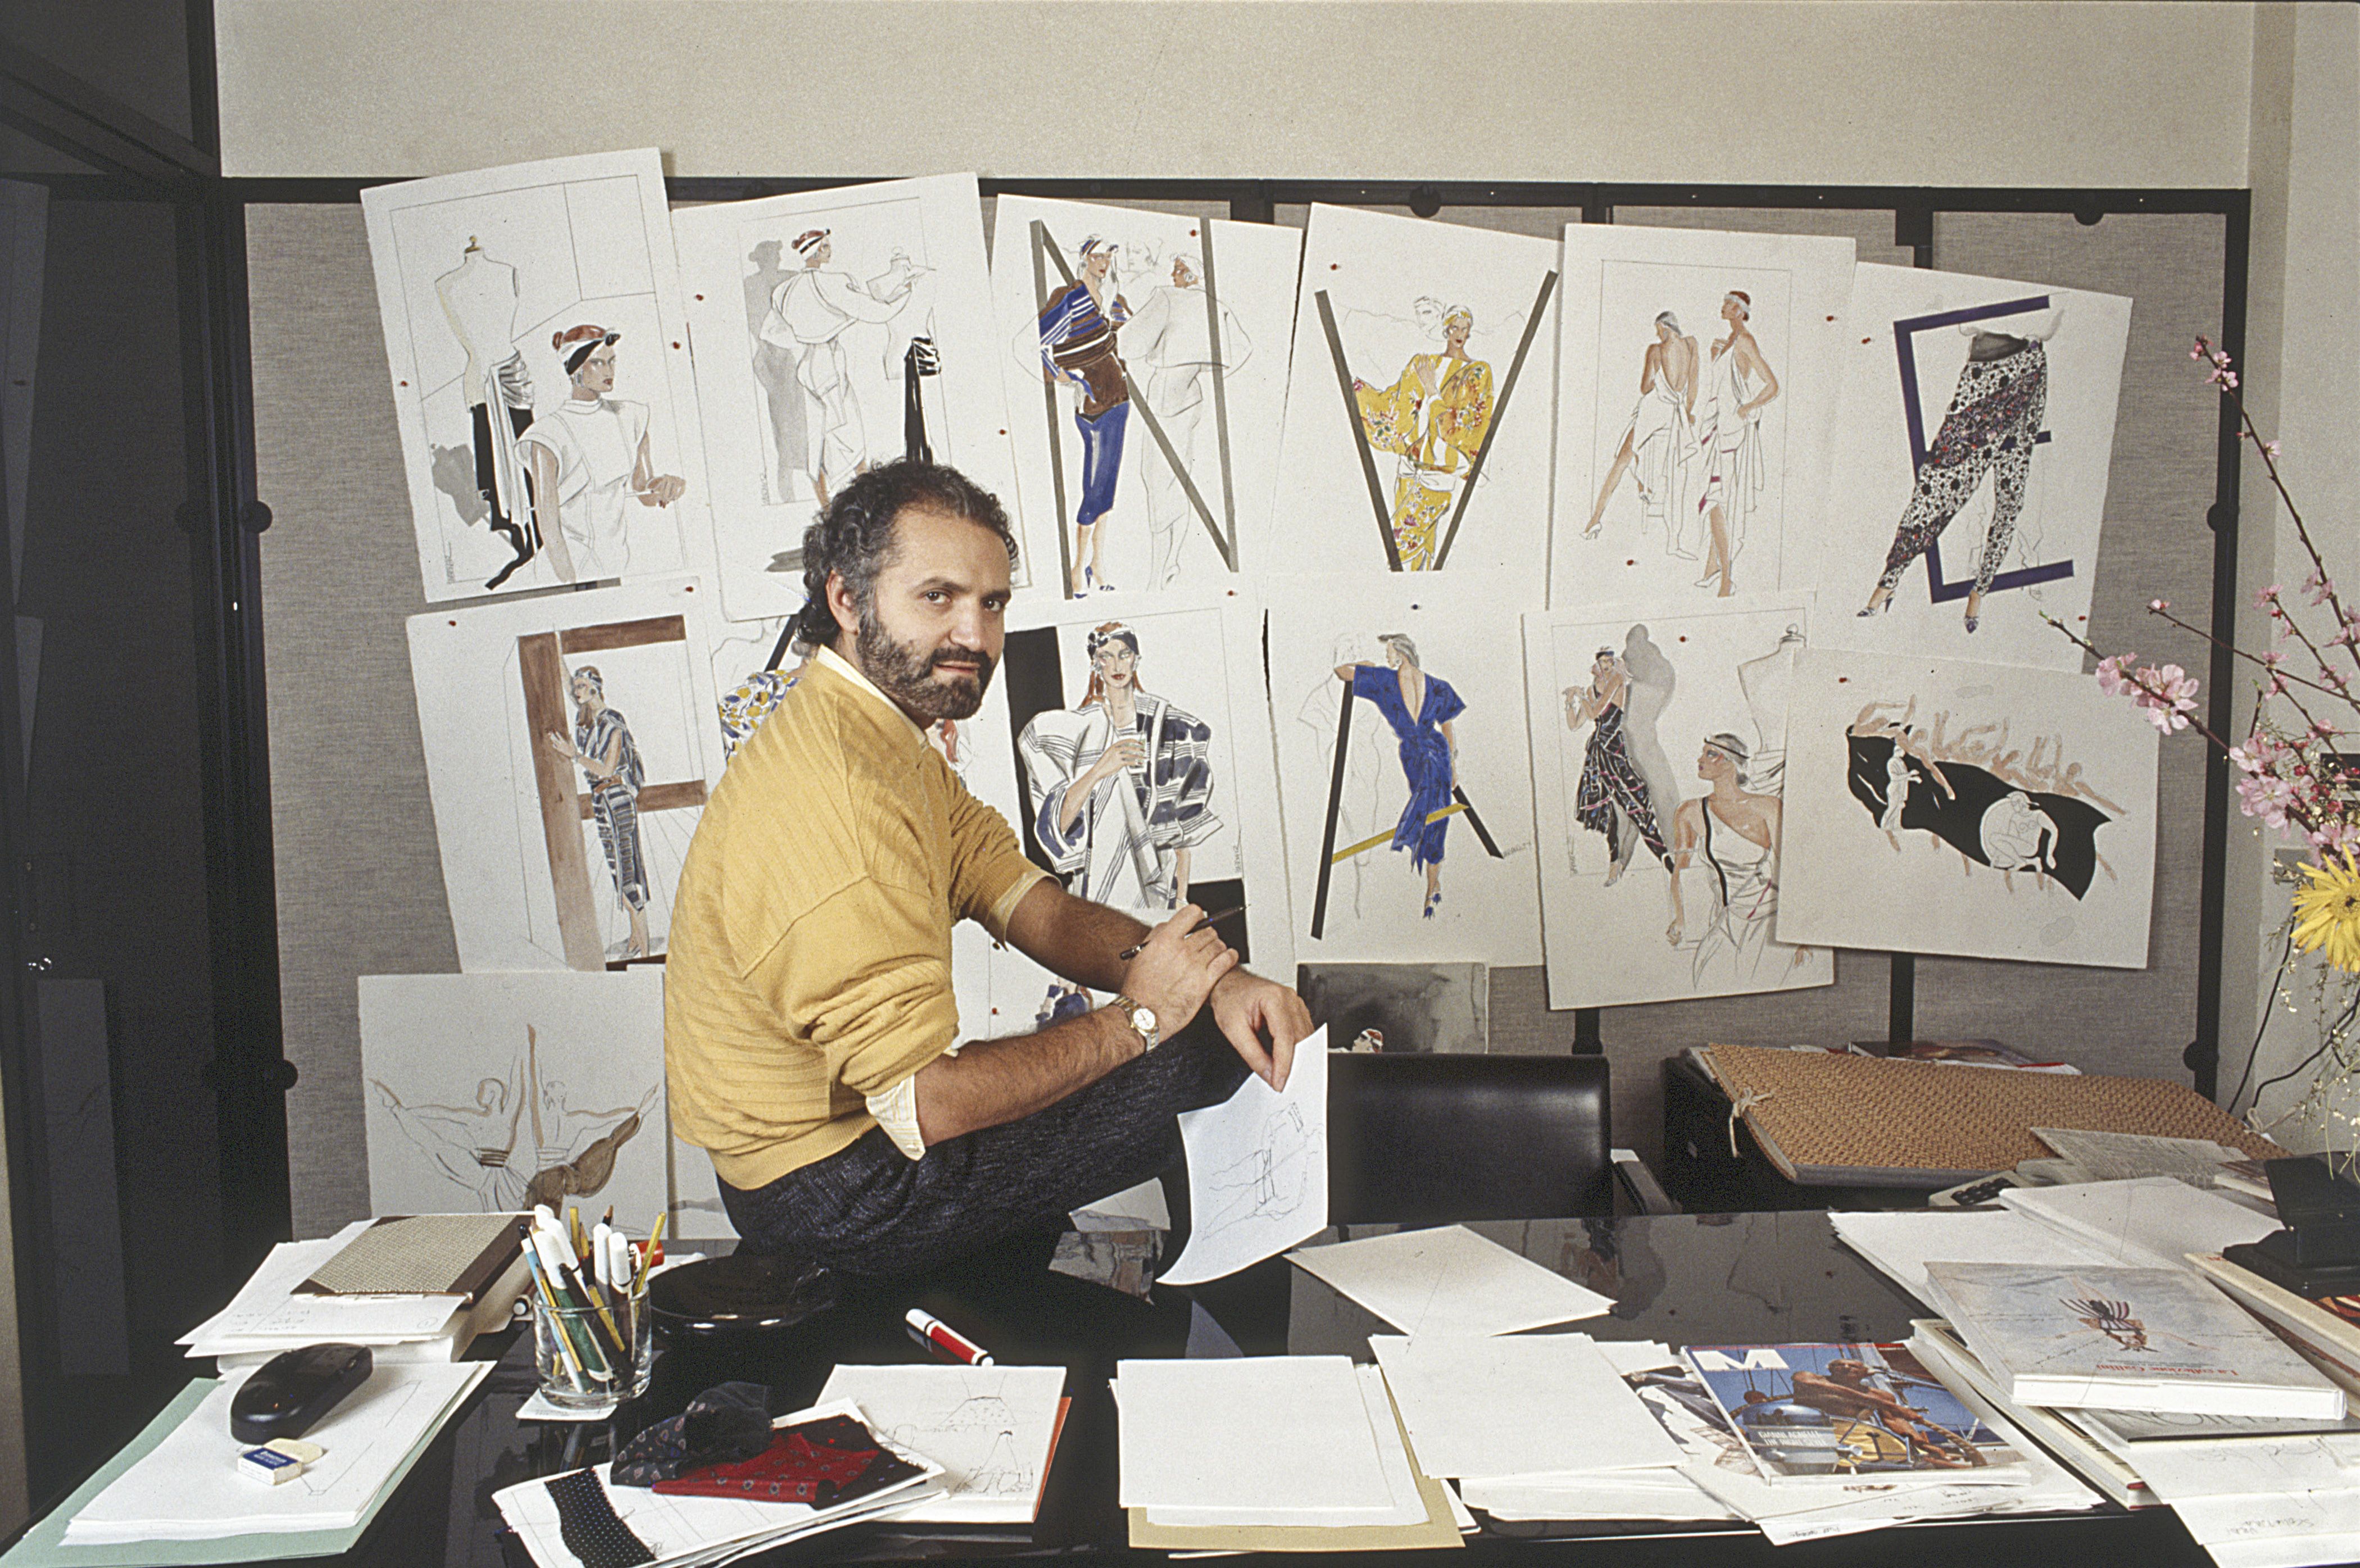 Gianni Versace, Biography, Fashion Designs, Death, & Facts